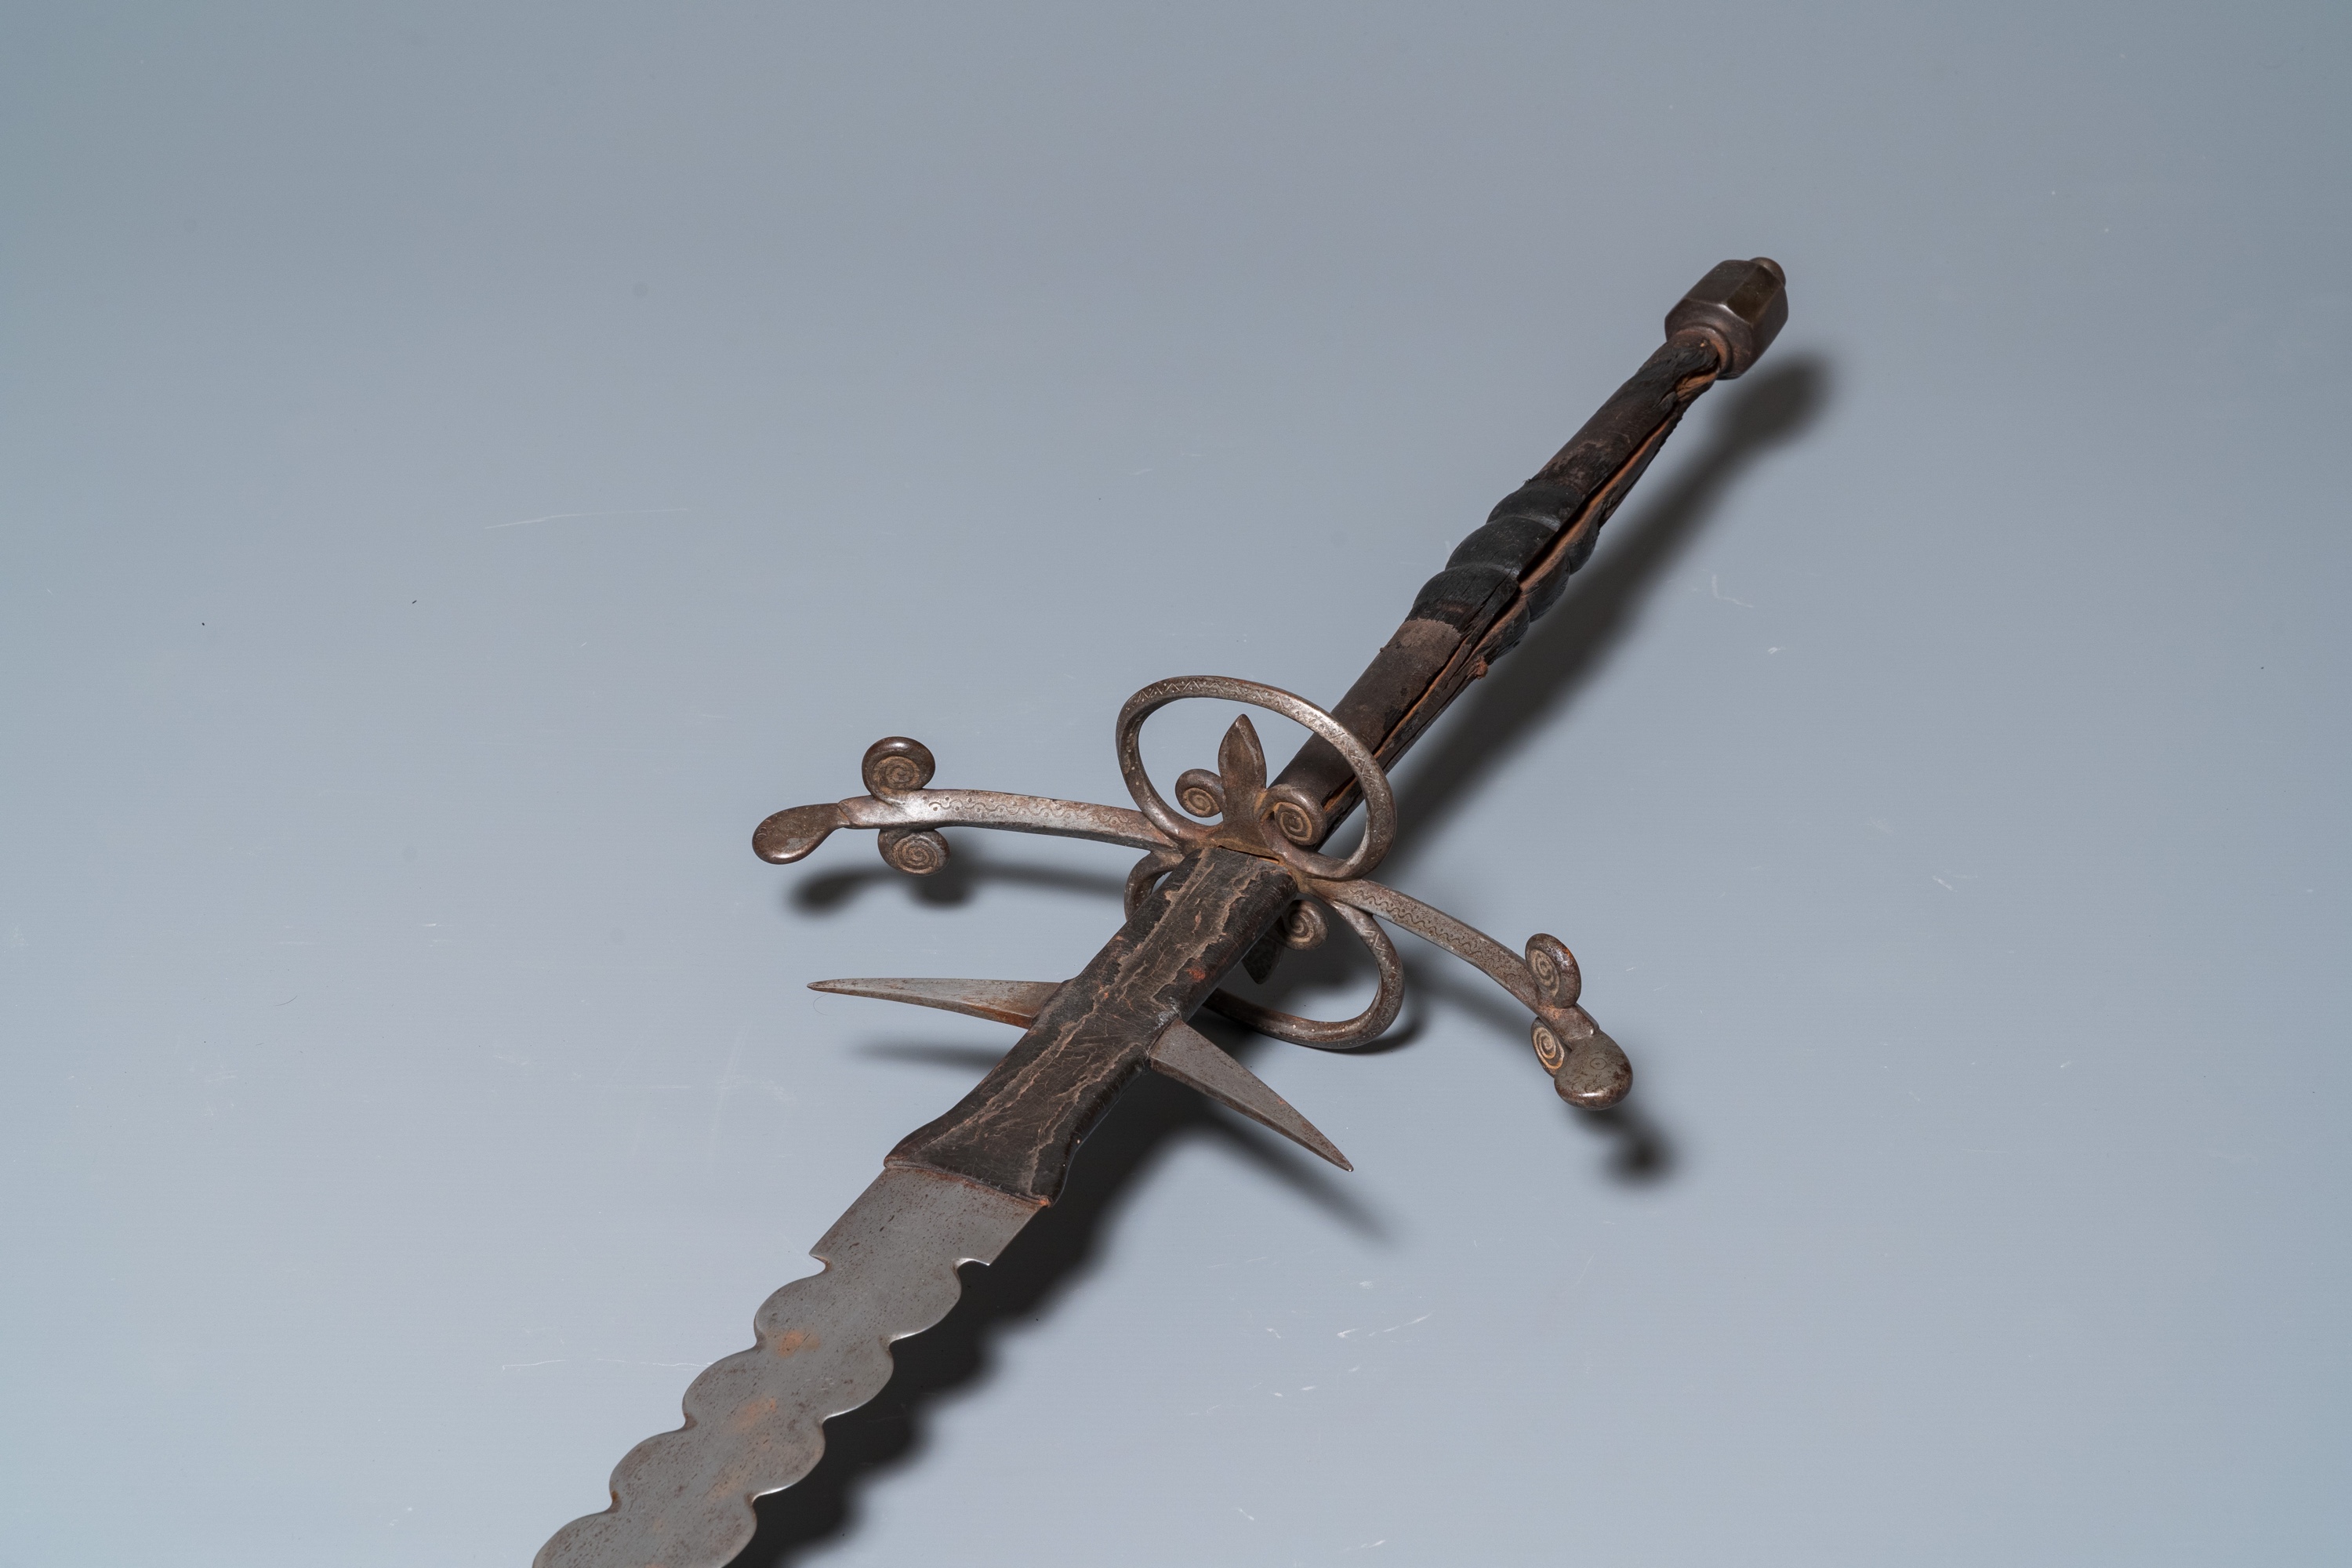 A large two-handed 'Flamberge' sword, Germany, 2nd half 16th C. - Image 6 of 9